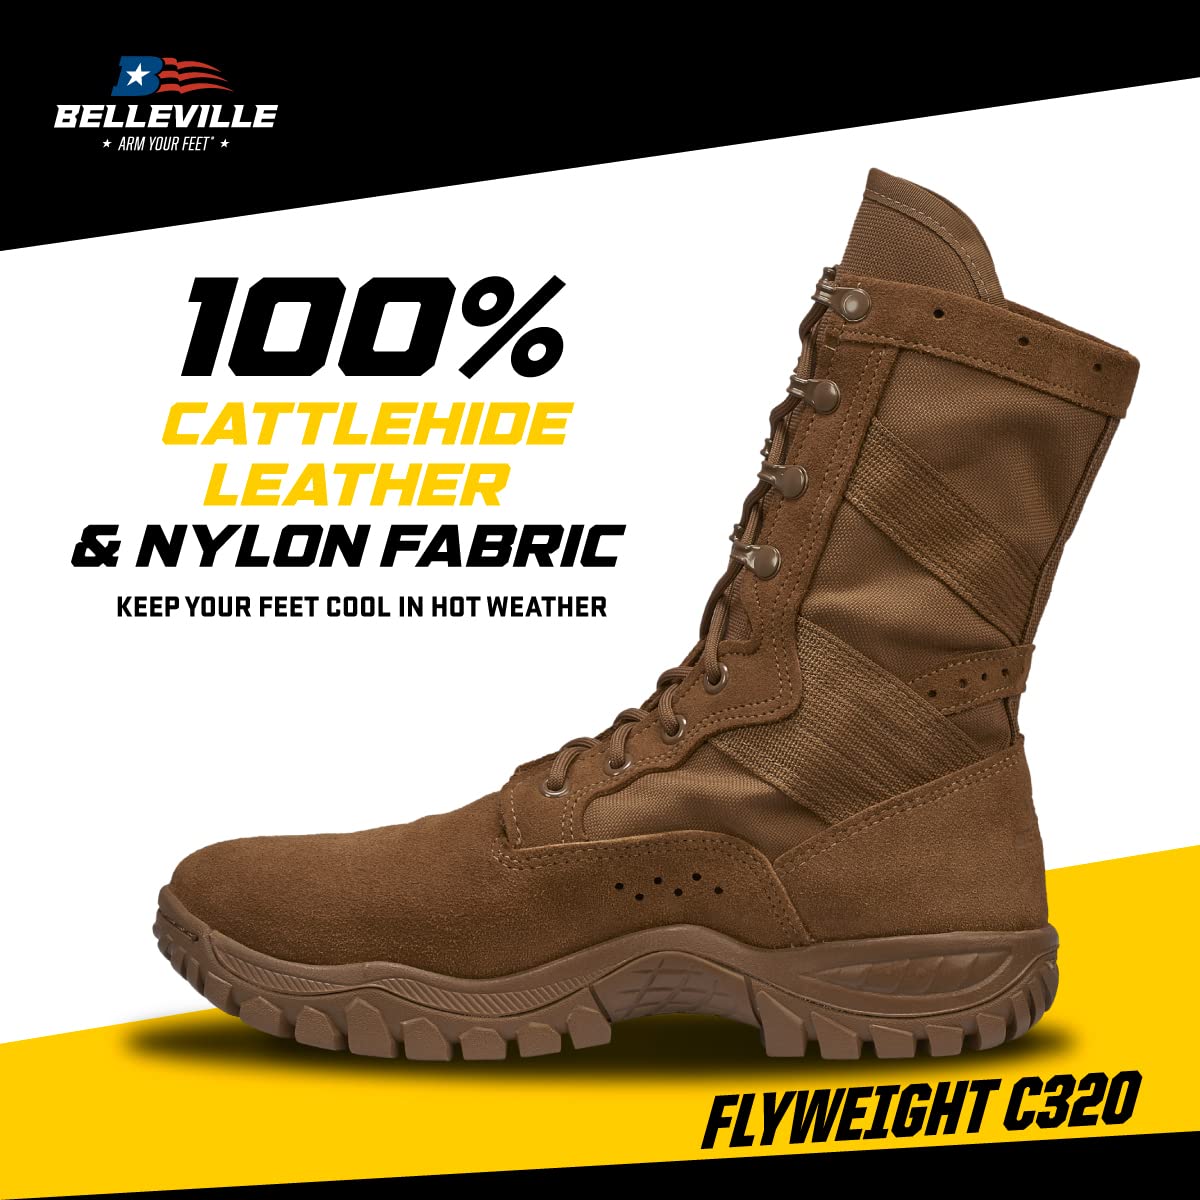 Belleville C320 One Xero 8 Inch Combat Boots for Men - Ultra-Lightweight Army/Air Force OCP ACU Coyote Brown Leather with Vibram Incisor Traction Outsole; Berry Compliant